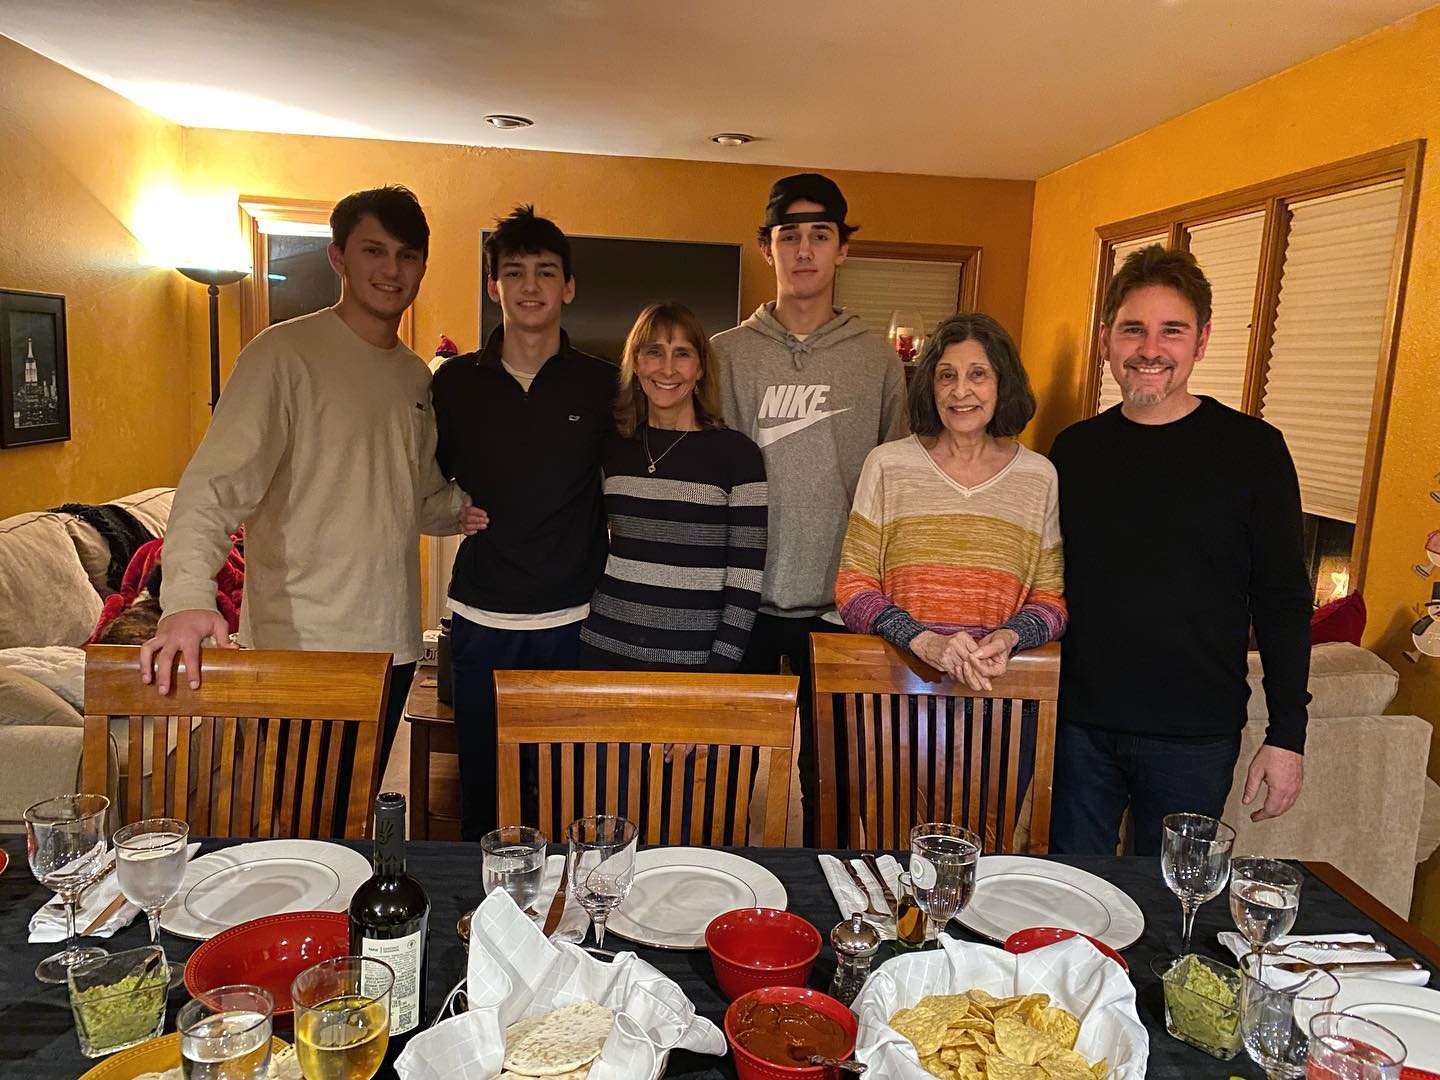 Warmest wishes to you from Sammamish! This is our crew pre-Christmas Eve feast. I famously don’t cook, but Jesse and I have gotten rather skilled at making Posole the past three years! Now I have one dish I’d proudly make for you all 😀 Peace & Love to you and yours!